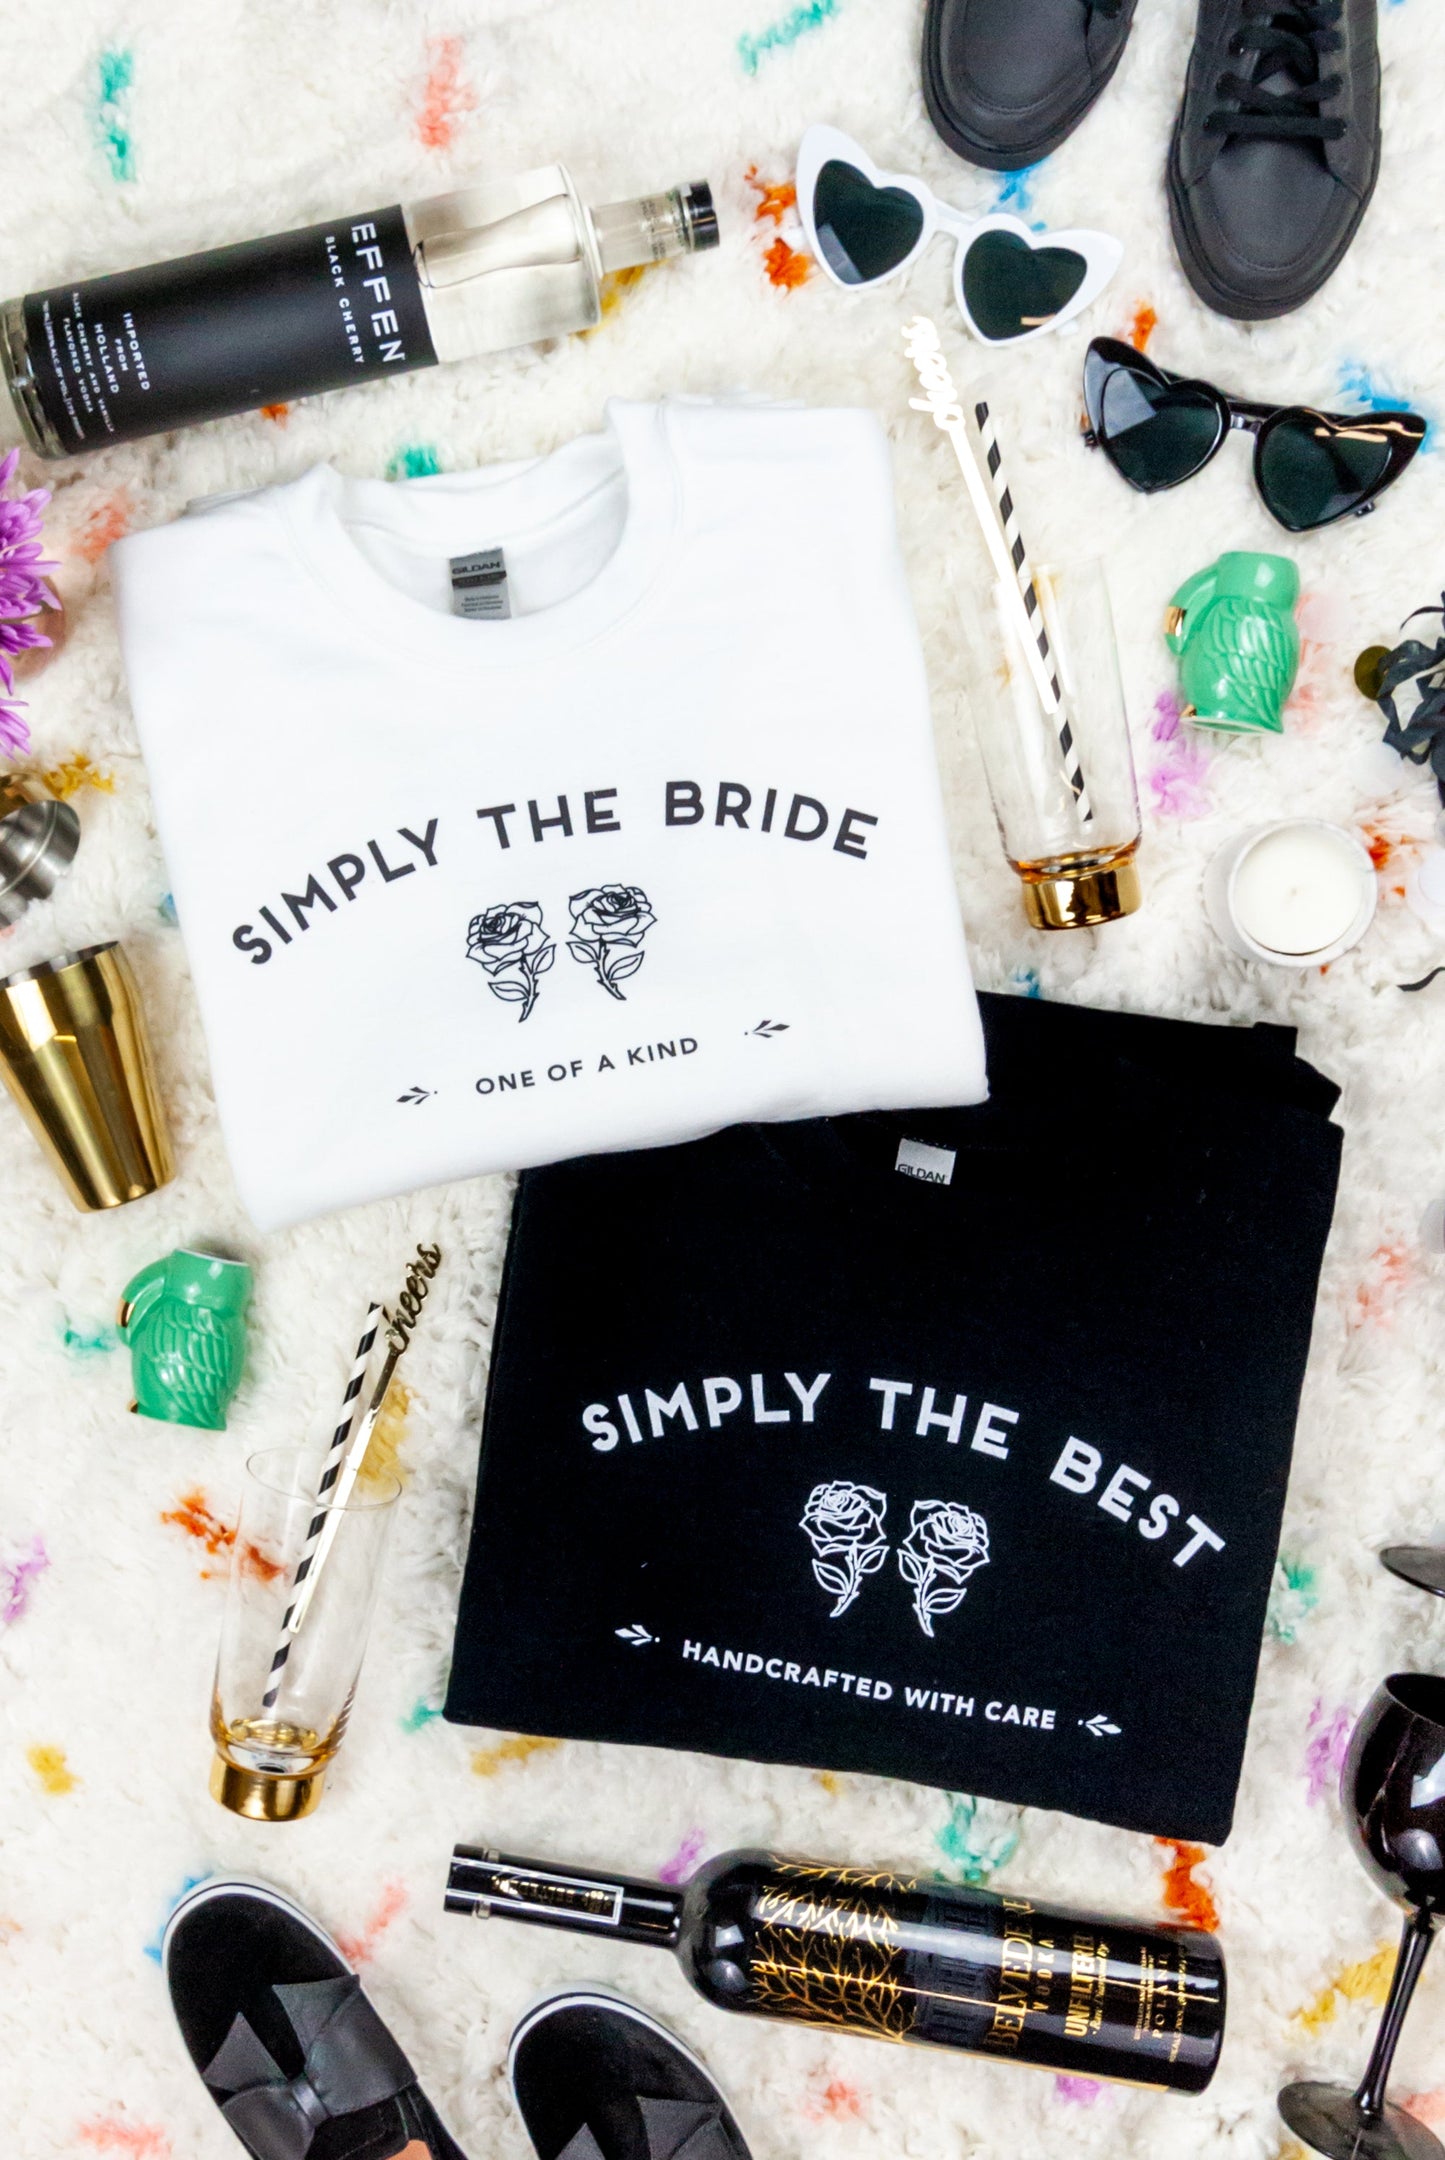 Simply the Bride | Simply the Best - Bachelorette Party Sweatshirts